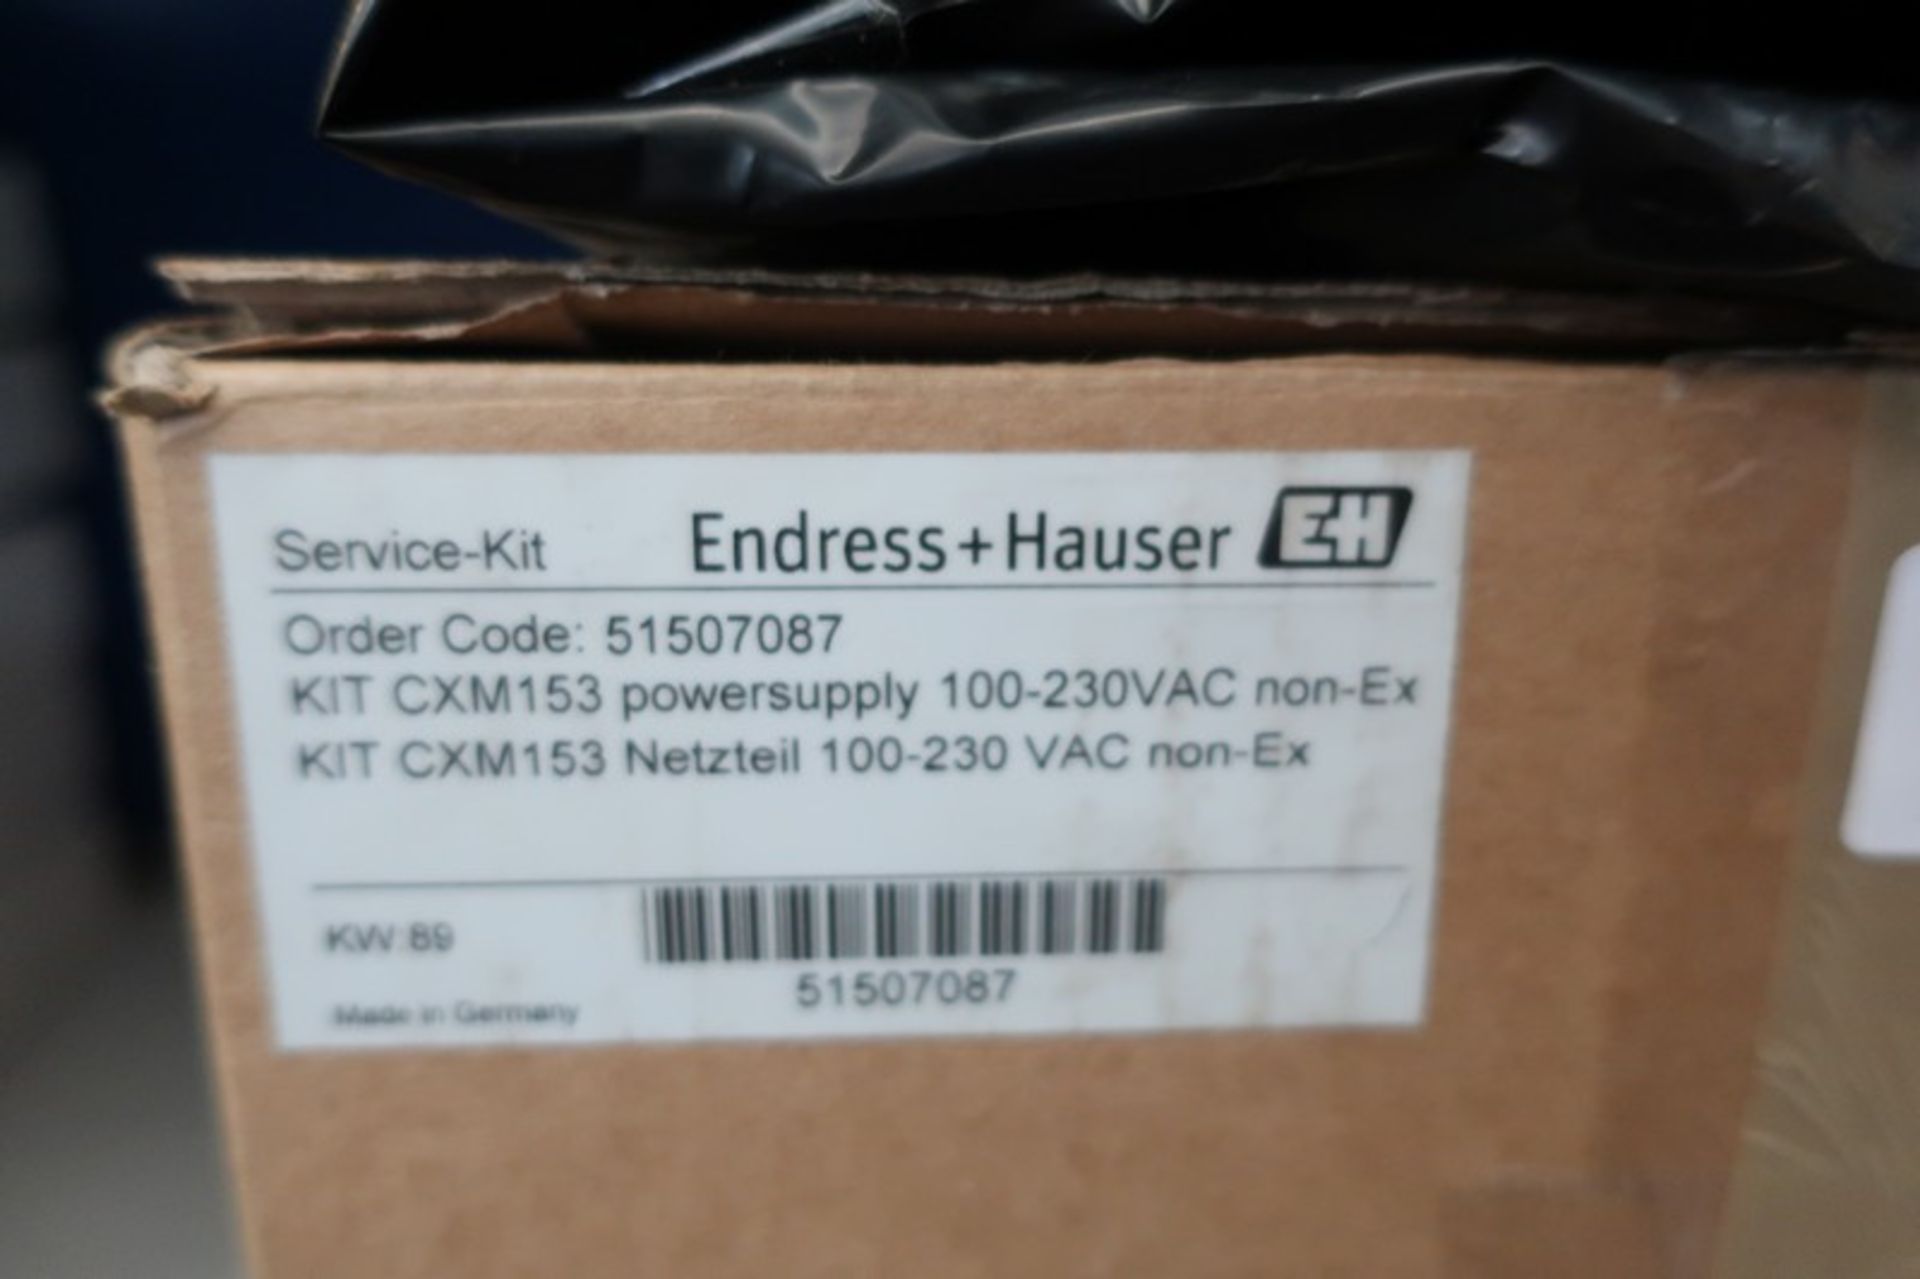 An Endress + Hauser KIT CXM153 power supply 100-230VAC non-Ex (In box, possibly new).